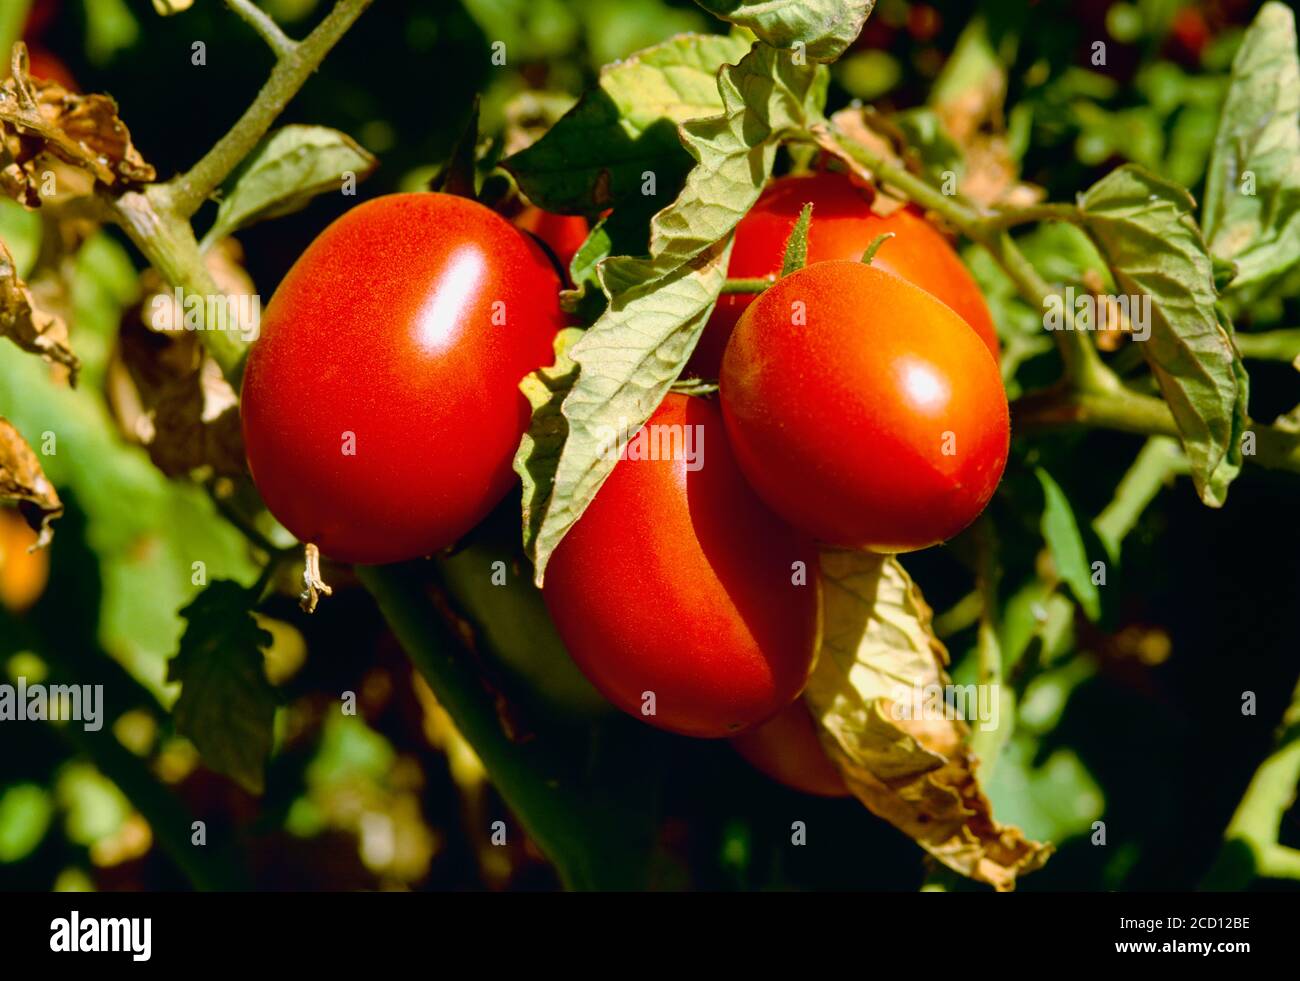 Agriculture - Closeup of mature processing tomatoes on the vines in the field / Brentwood, California, USA. Stock Photo